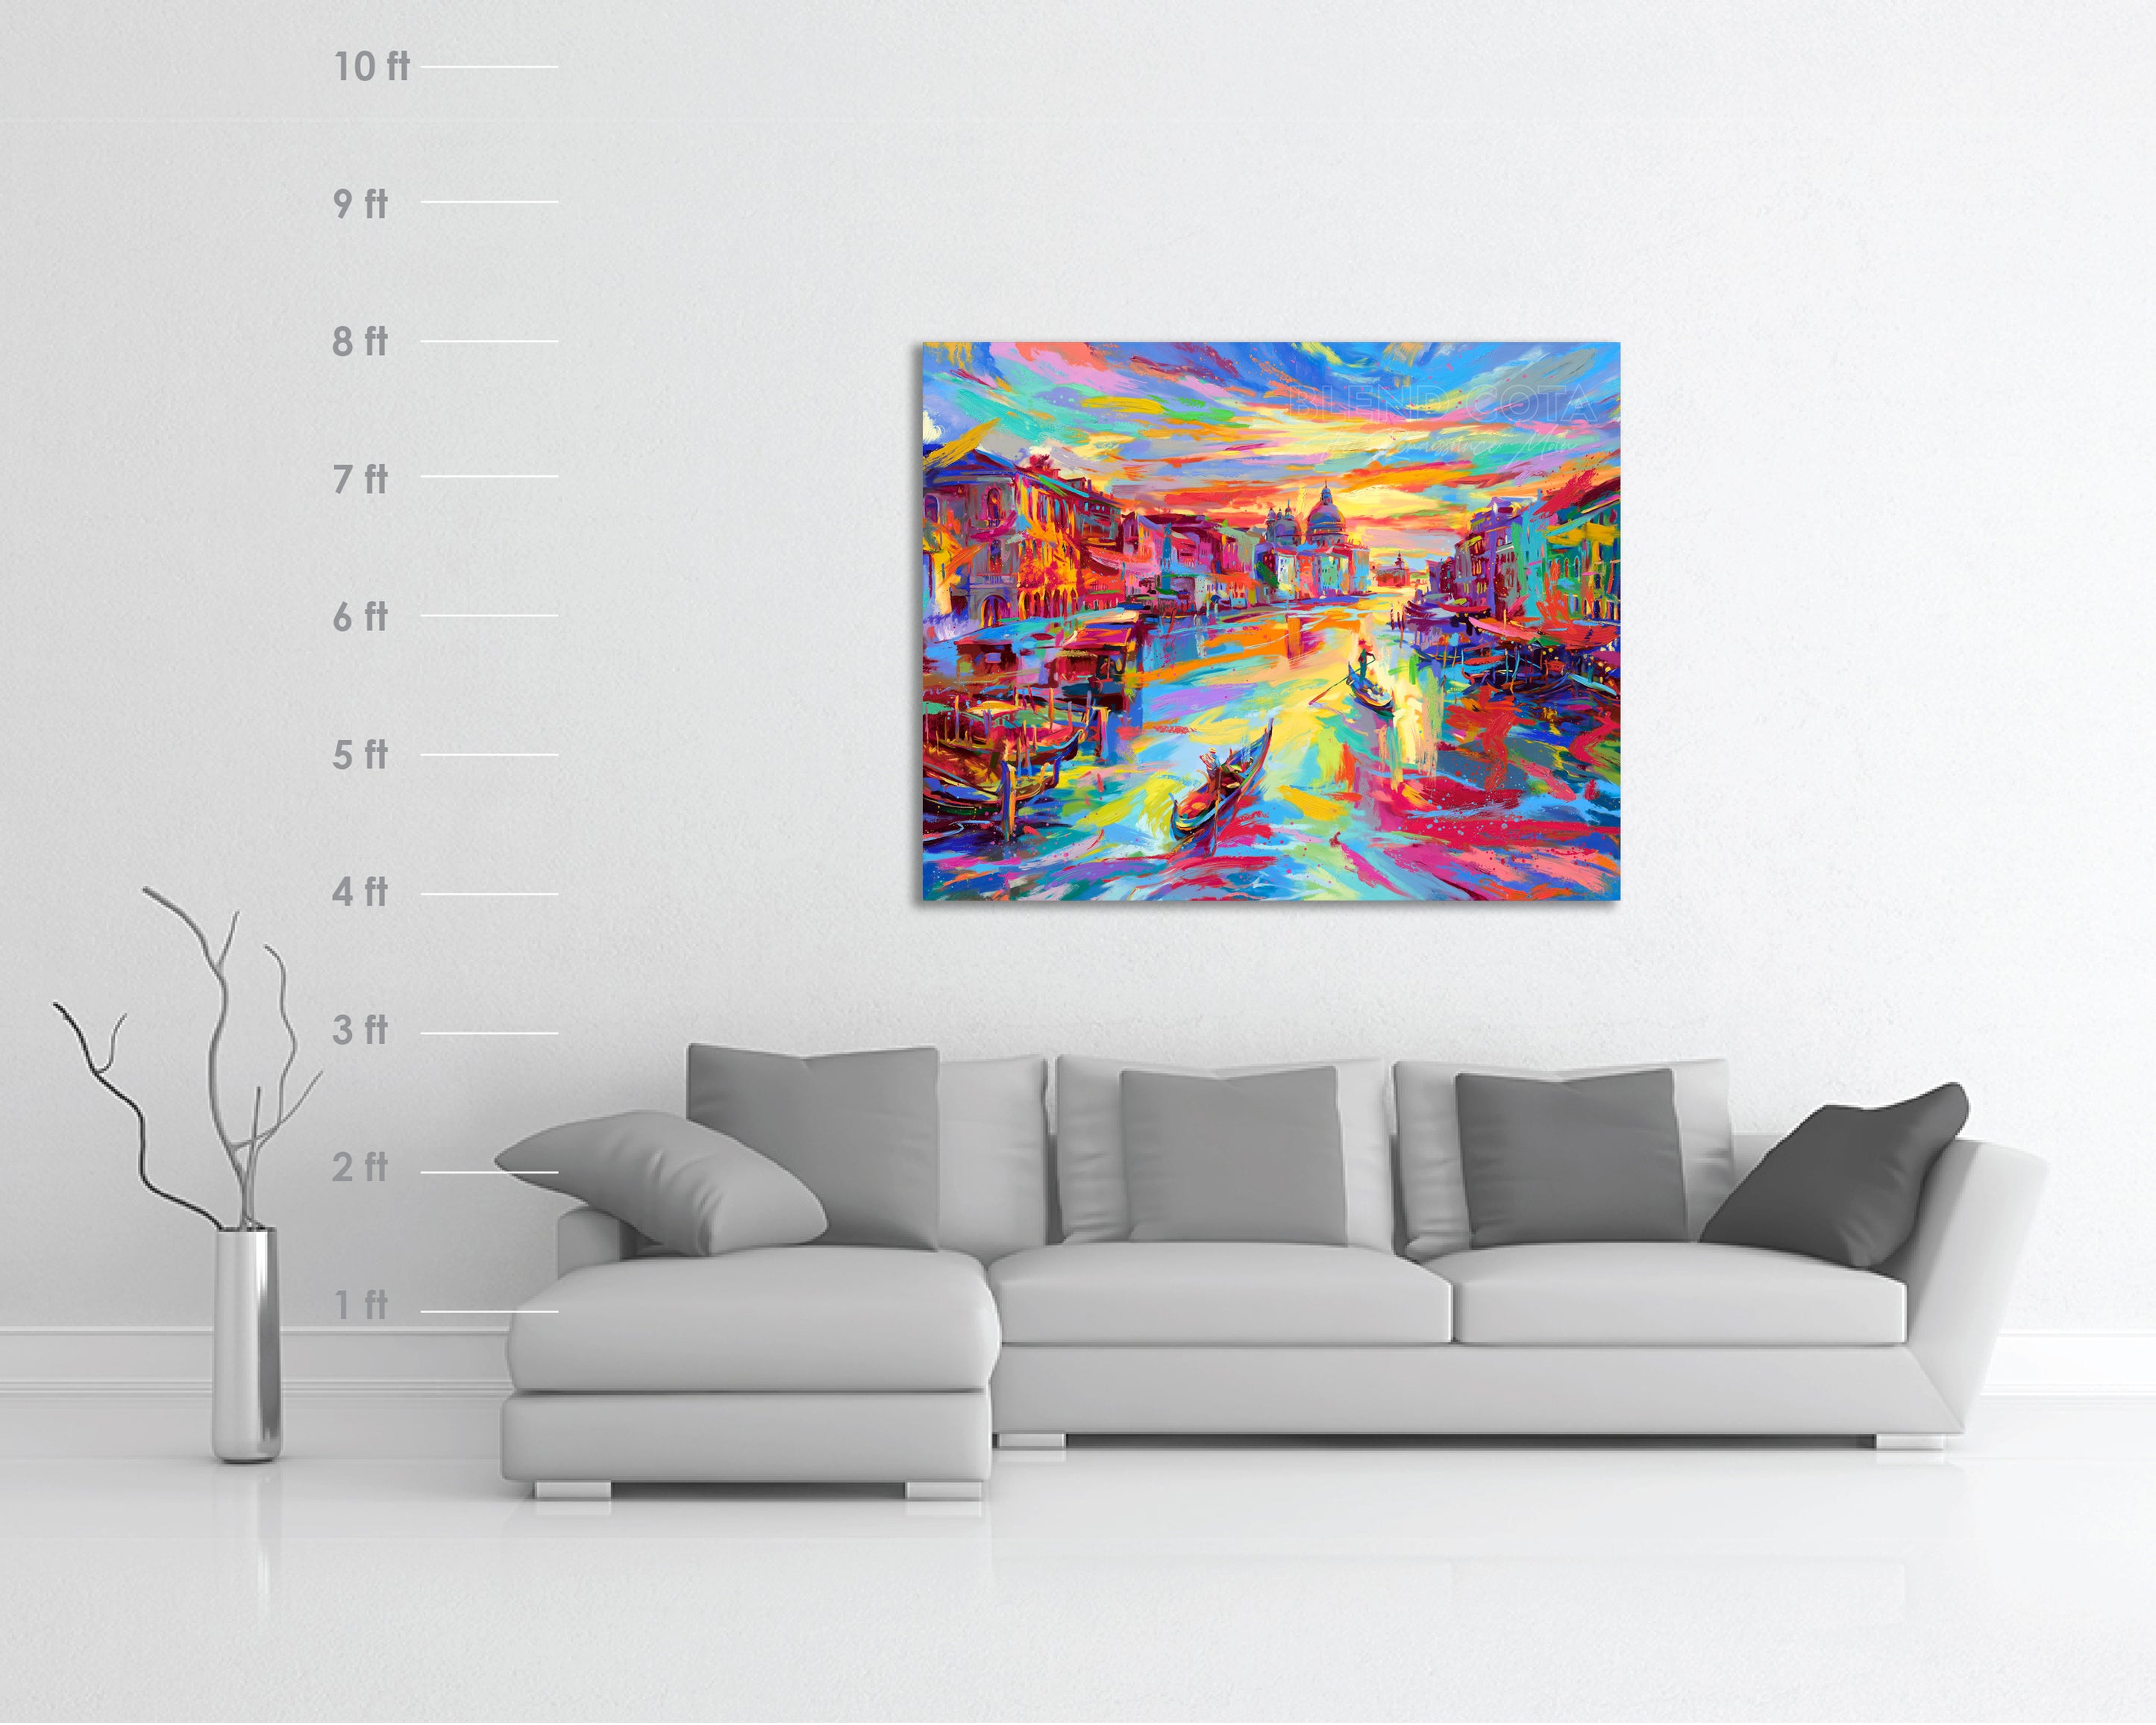 
                  
                    Venice colour painting - The City of Water painted by Blend Cota Original oil painting from Blend Cota Studios with painting hanging on white wall with size chart comparison
                  
                